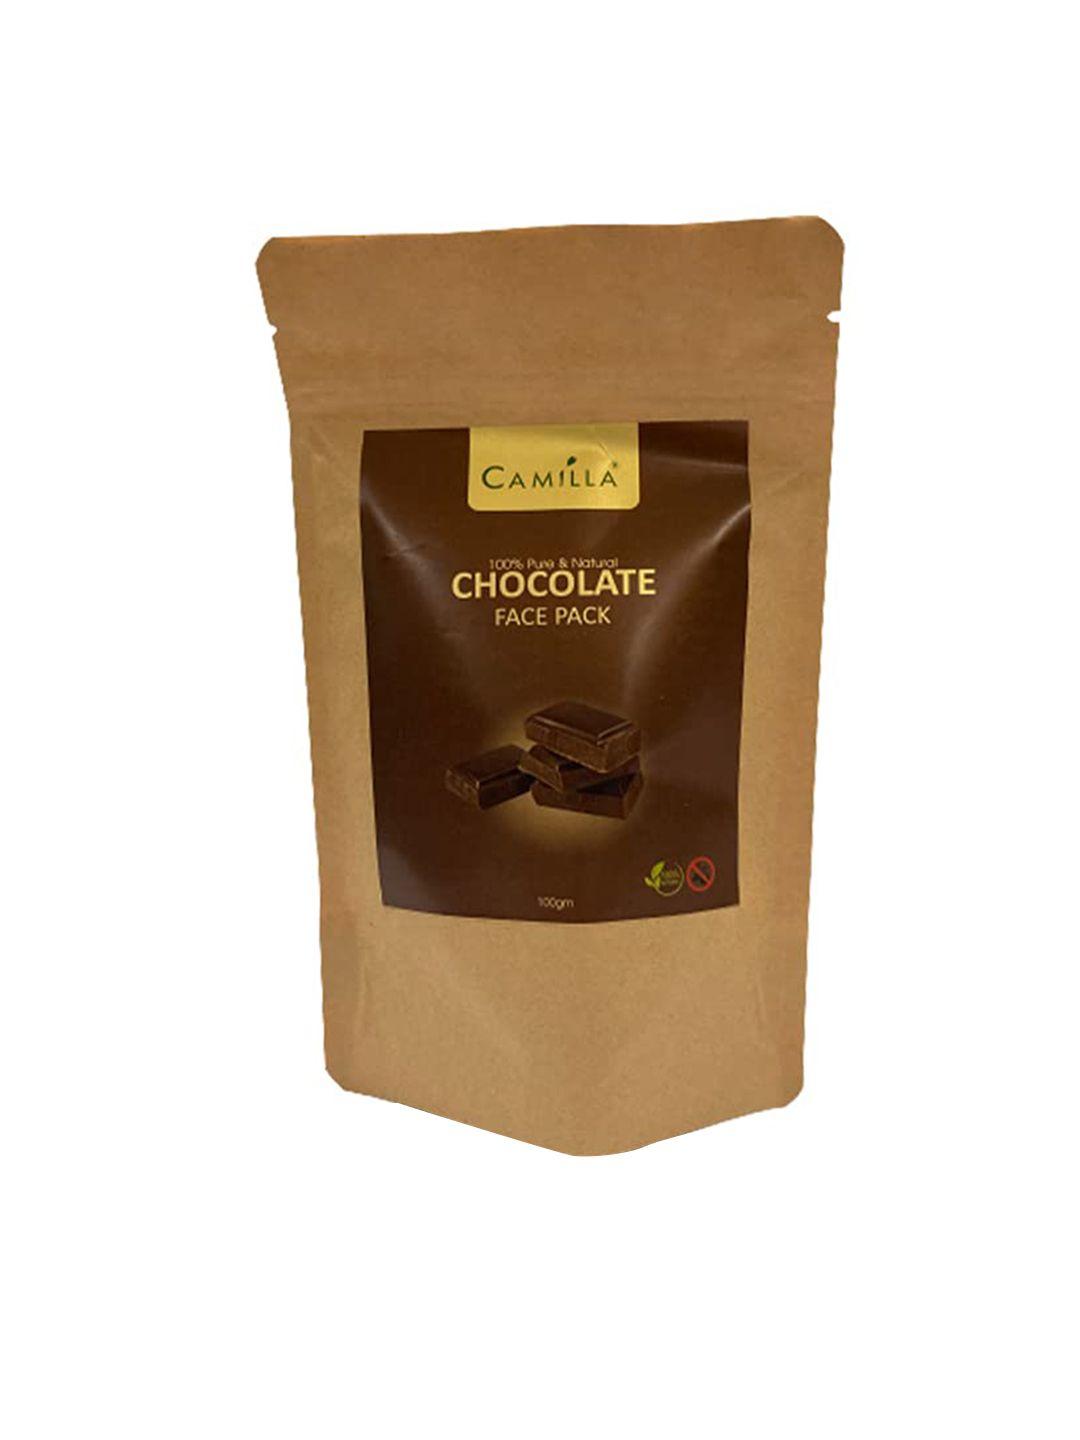 camilla 100% pure & natural chocolate face pack - 100 g